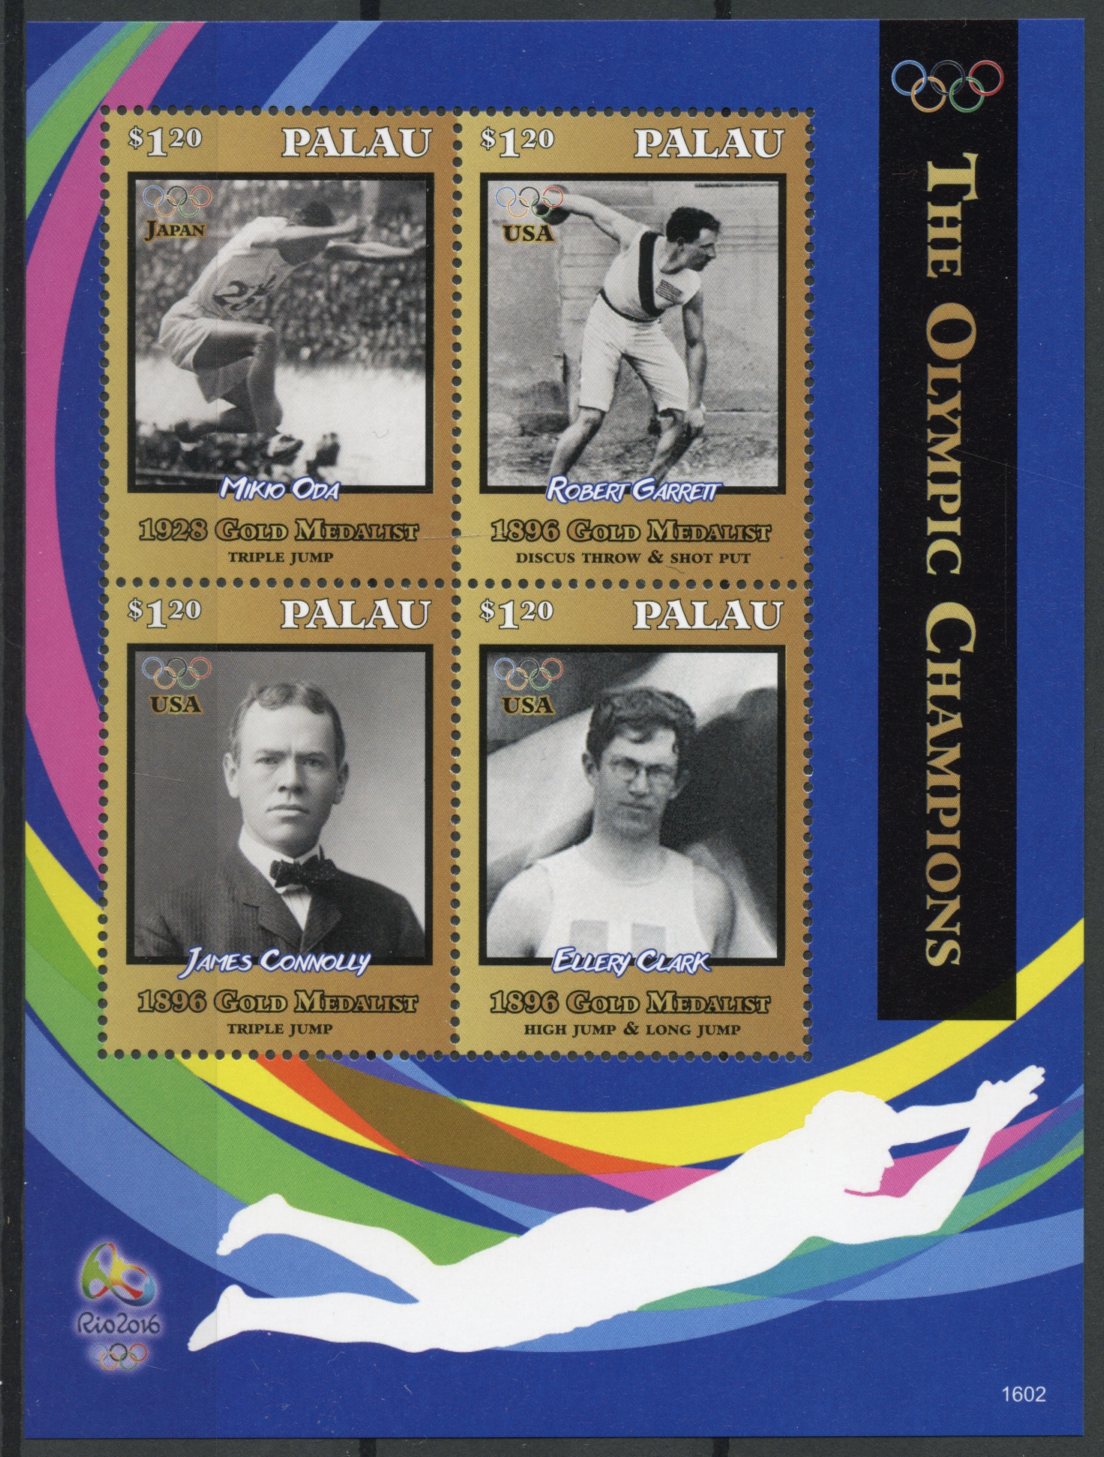 Palau 2016 MNH Olympic Champions 2016 Summer Olympics 4v M/S Ellery Clark Stamps